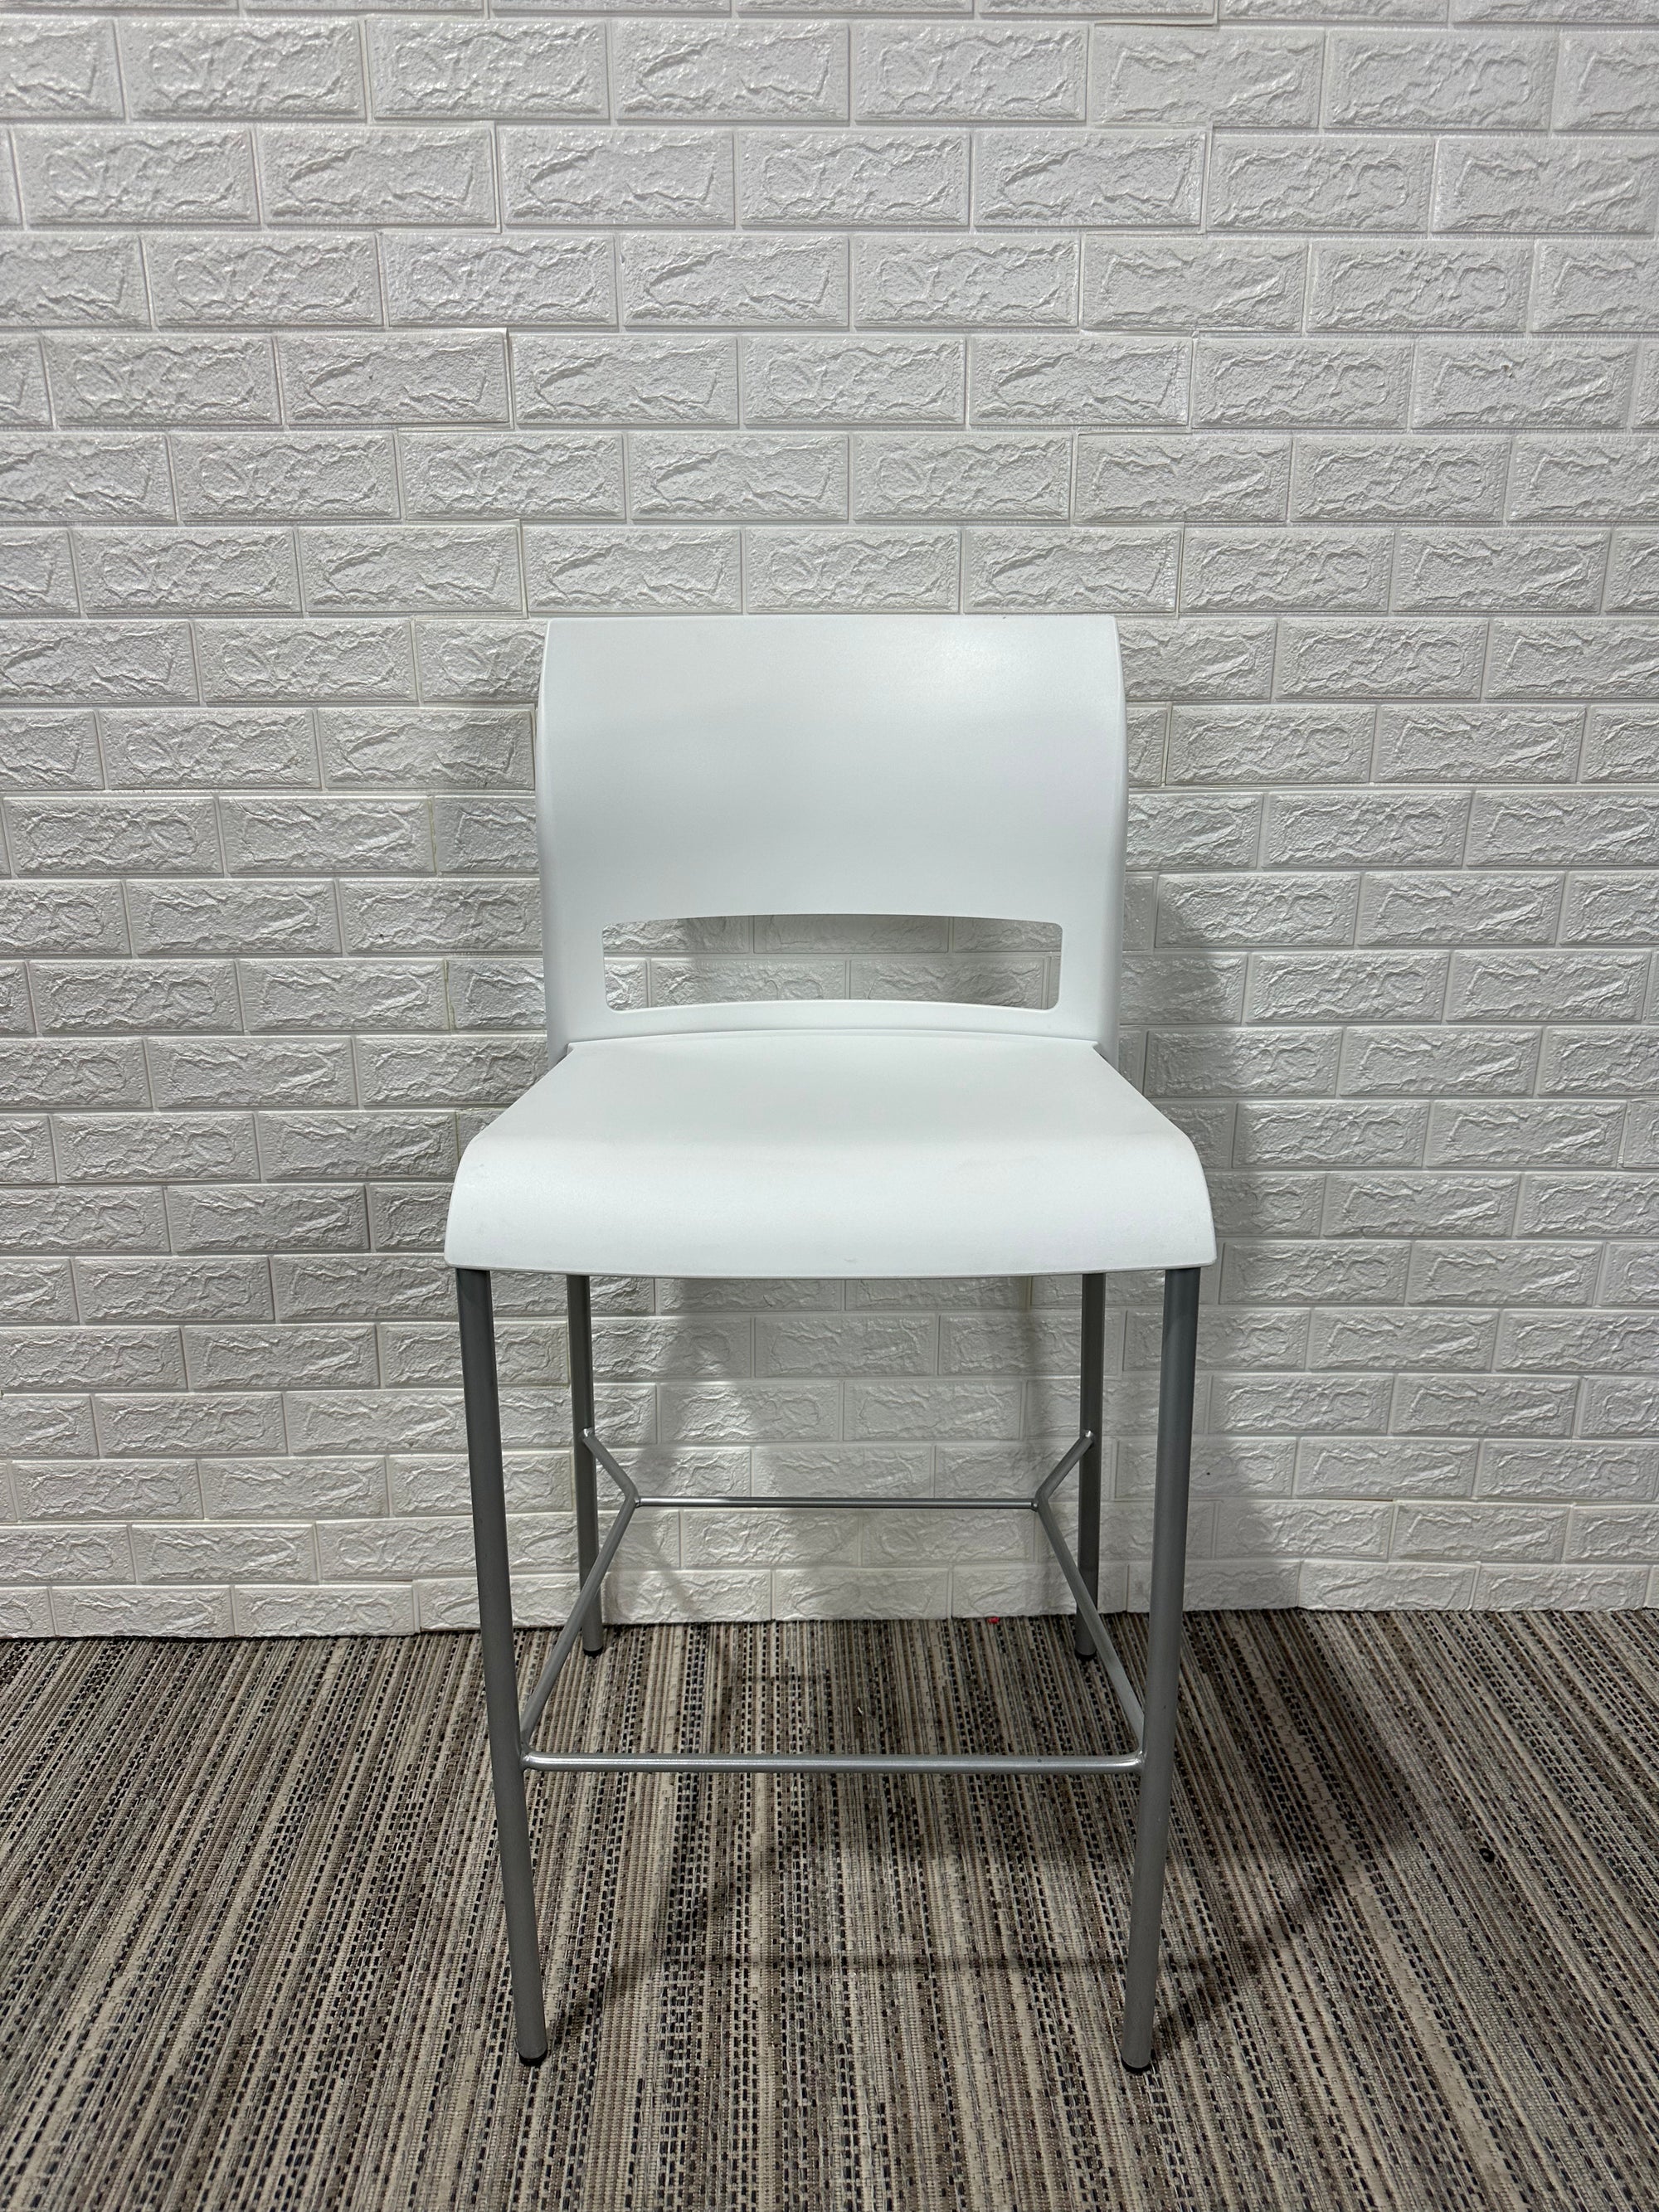 Pre-Owned Steelcase Bar Height Stools - Duckys Office Furniture